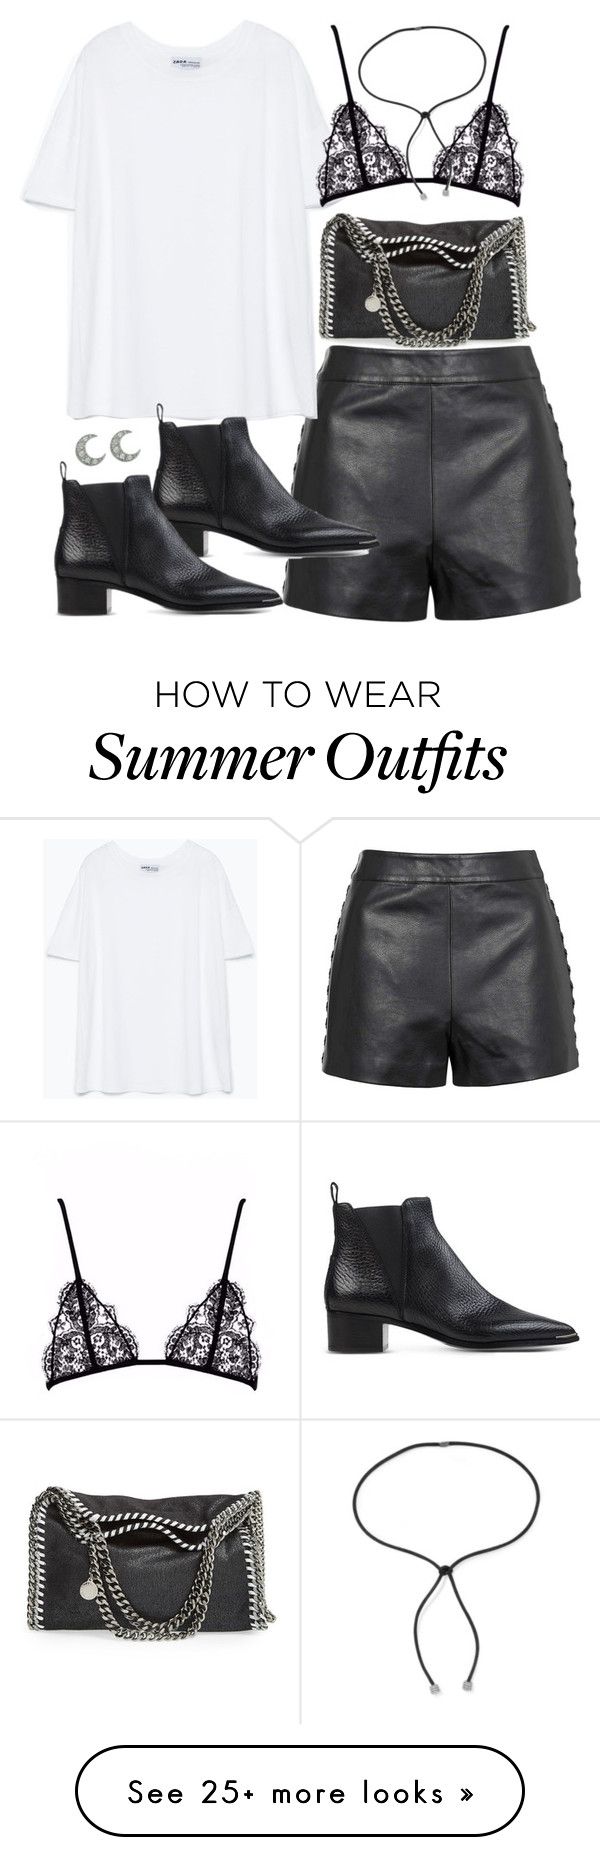 "Outfit for summer with leather shorts" by ferned on Polyvore featurin...